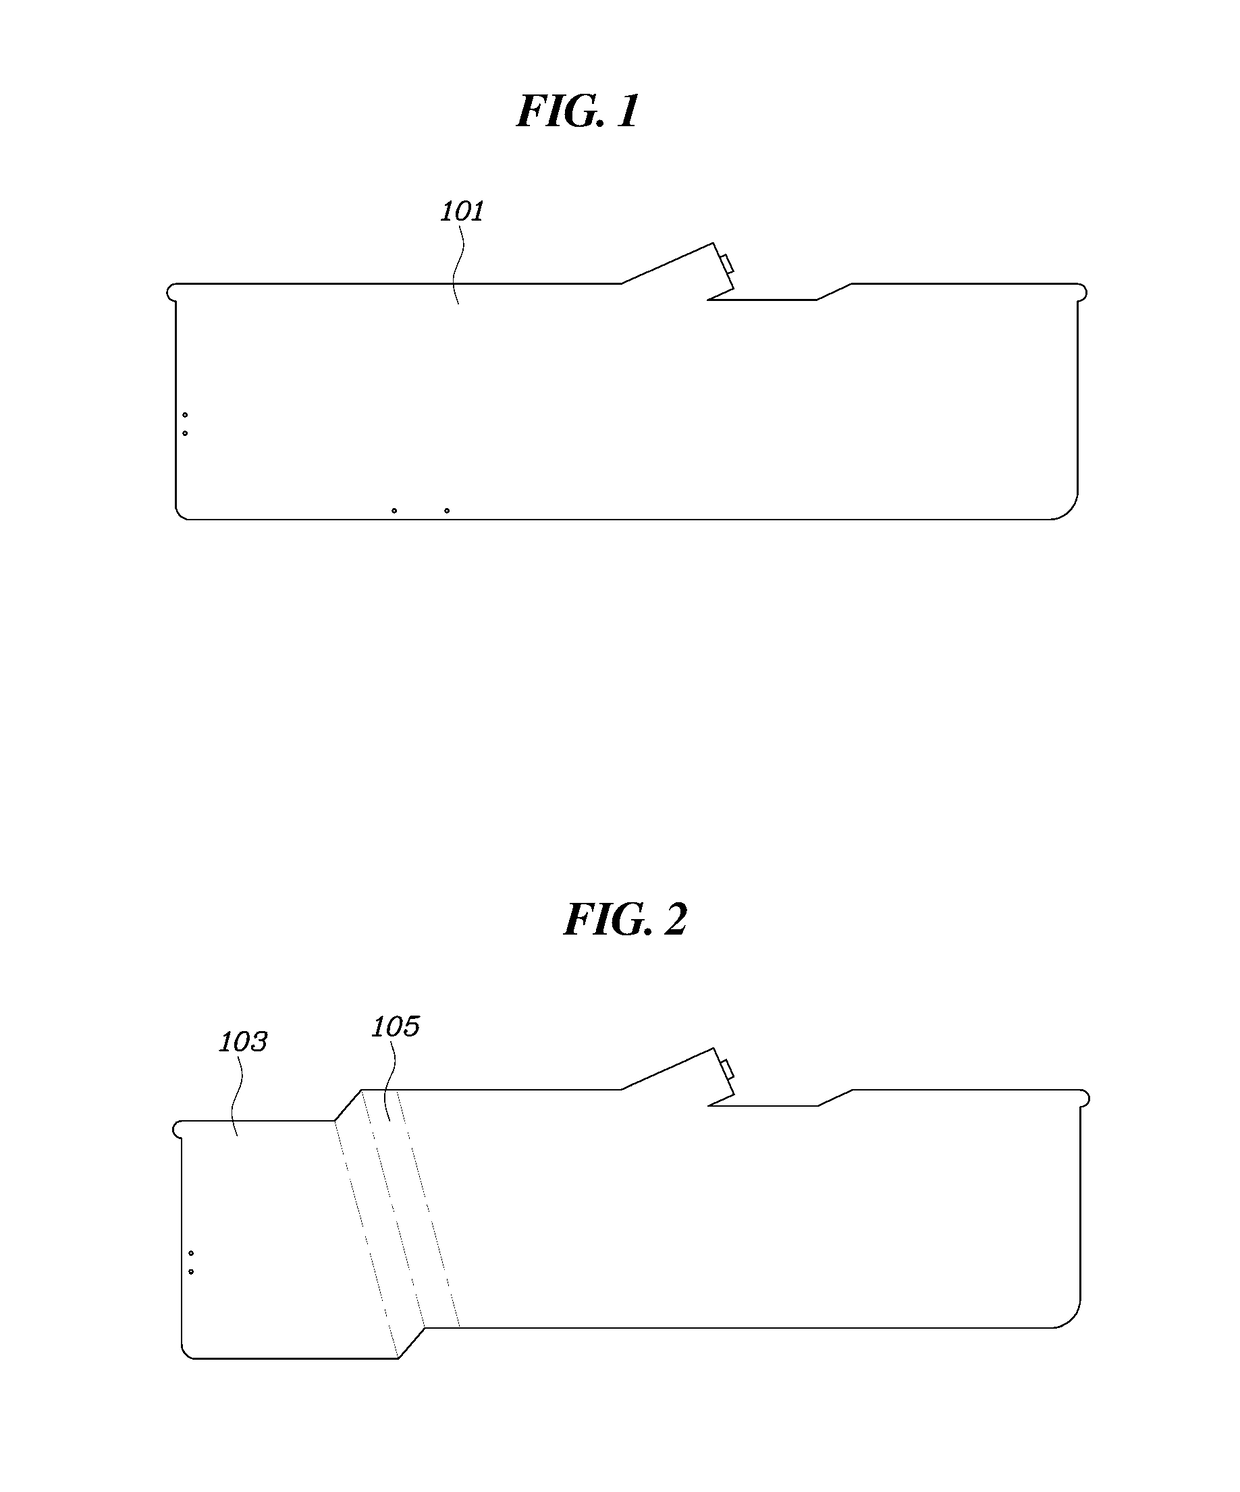 Curtain airbag for vehicle